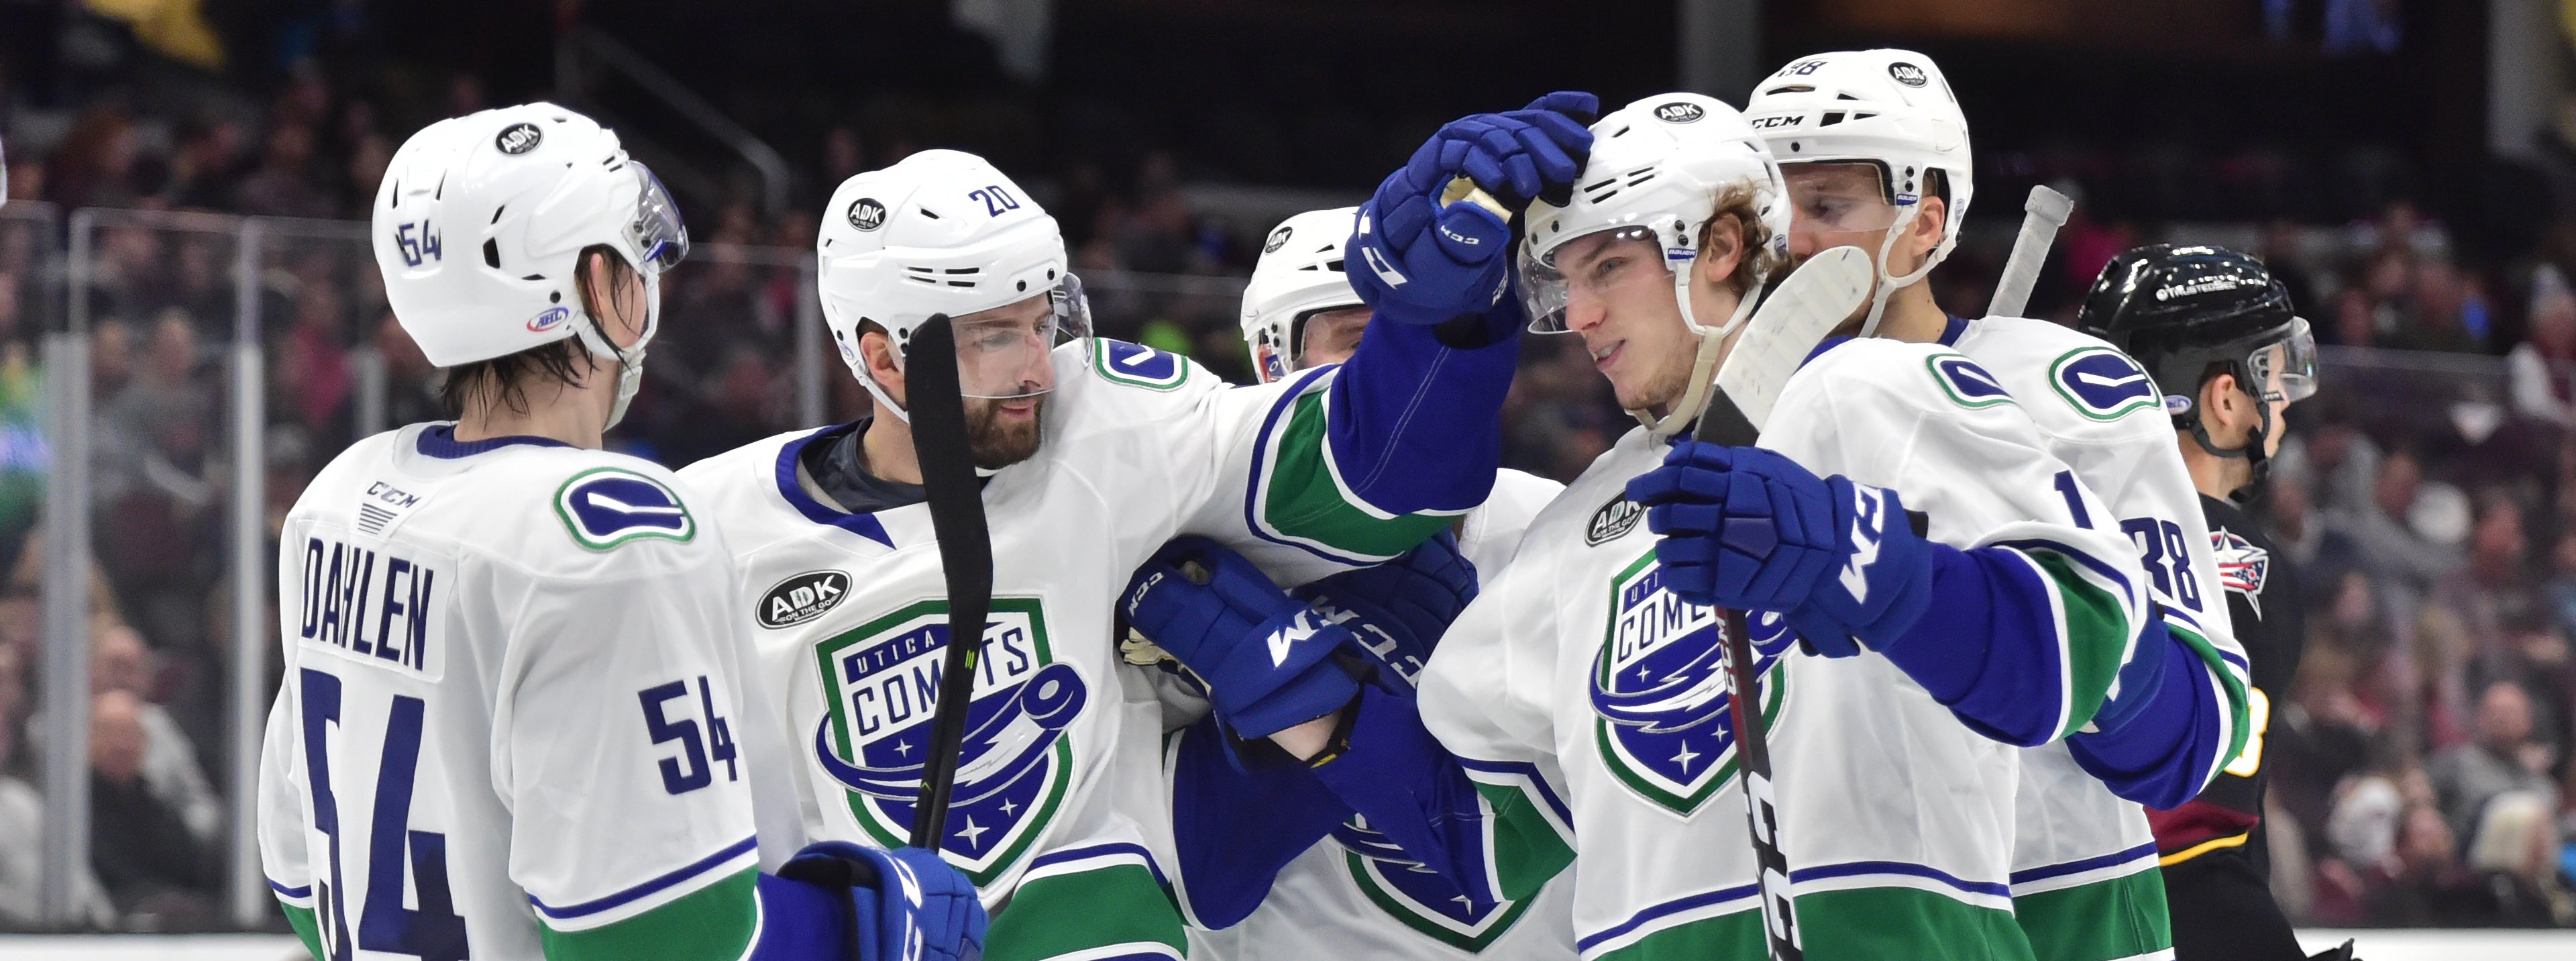 COMETS ROUT MONSTERS FOR THIRD STRAIGHT WIN